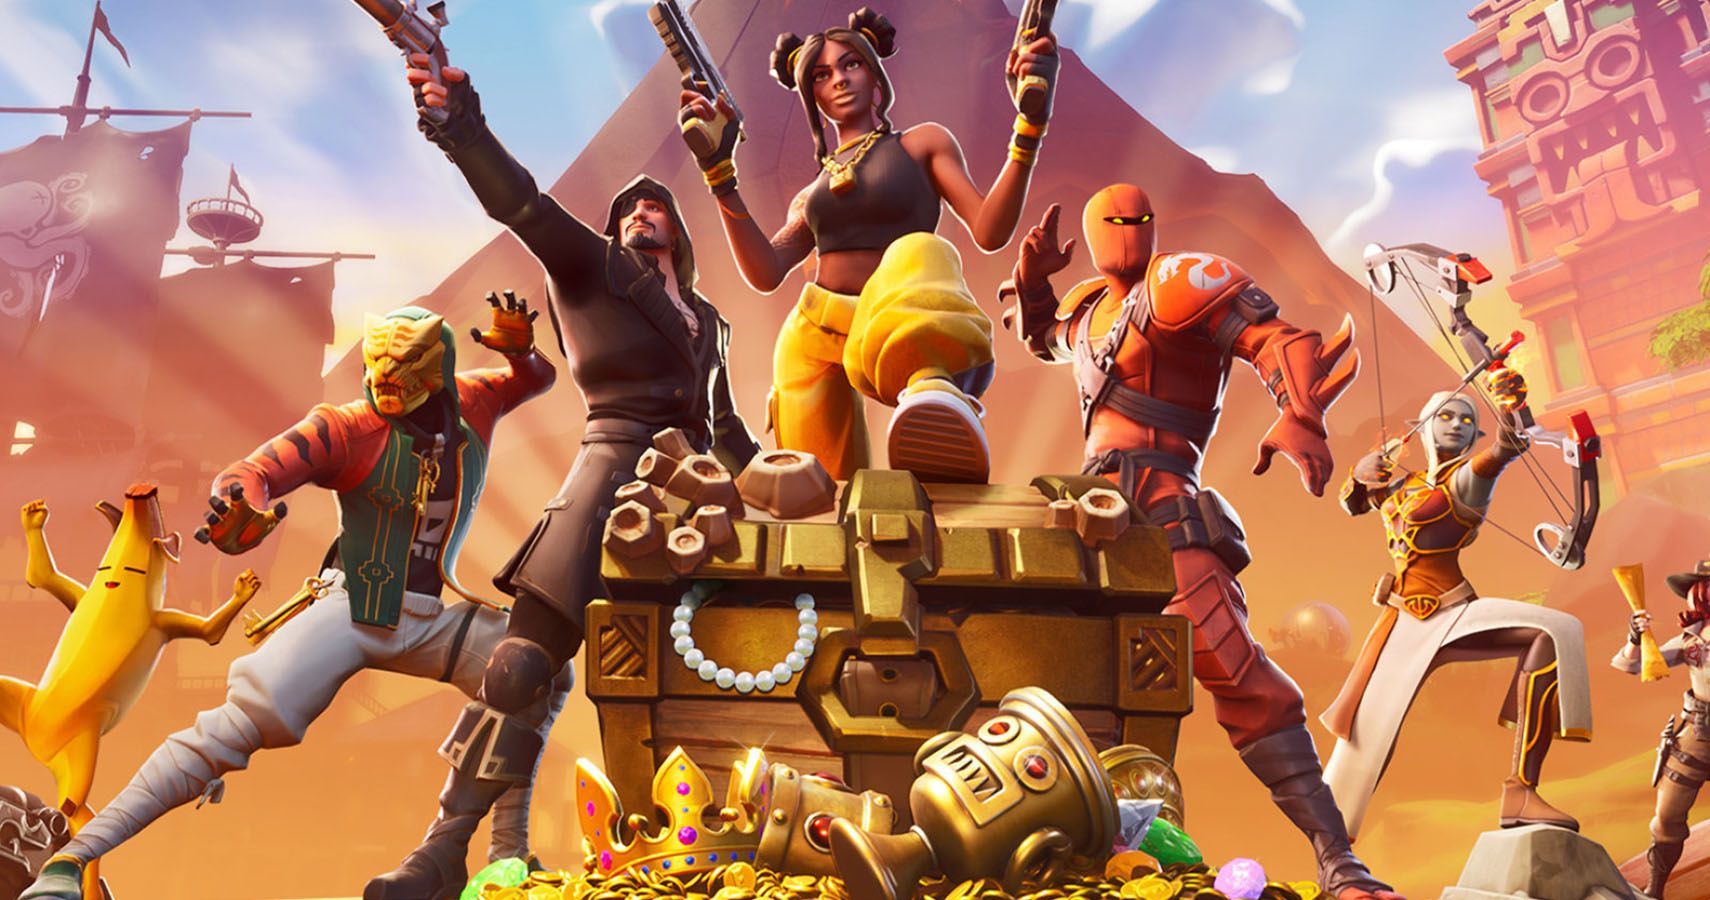 A promotional image of Fortnite